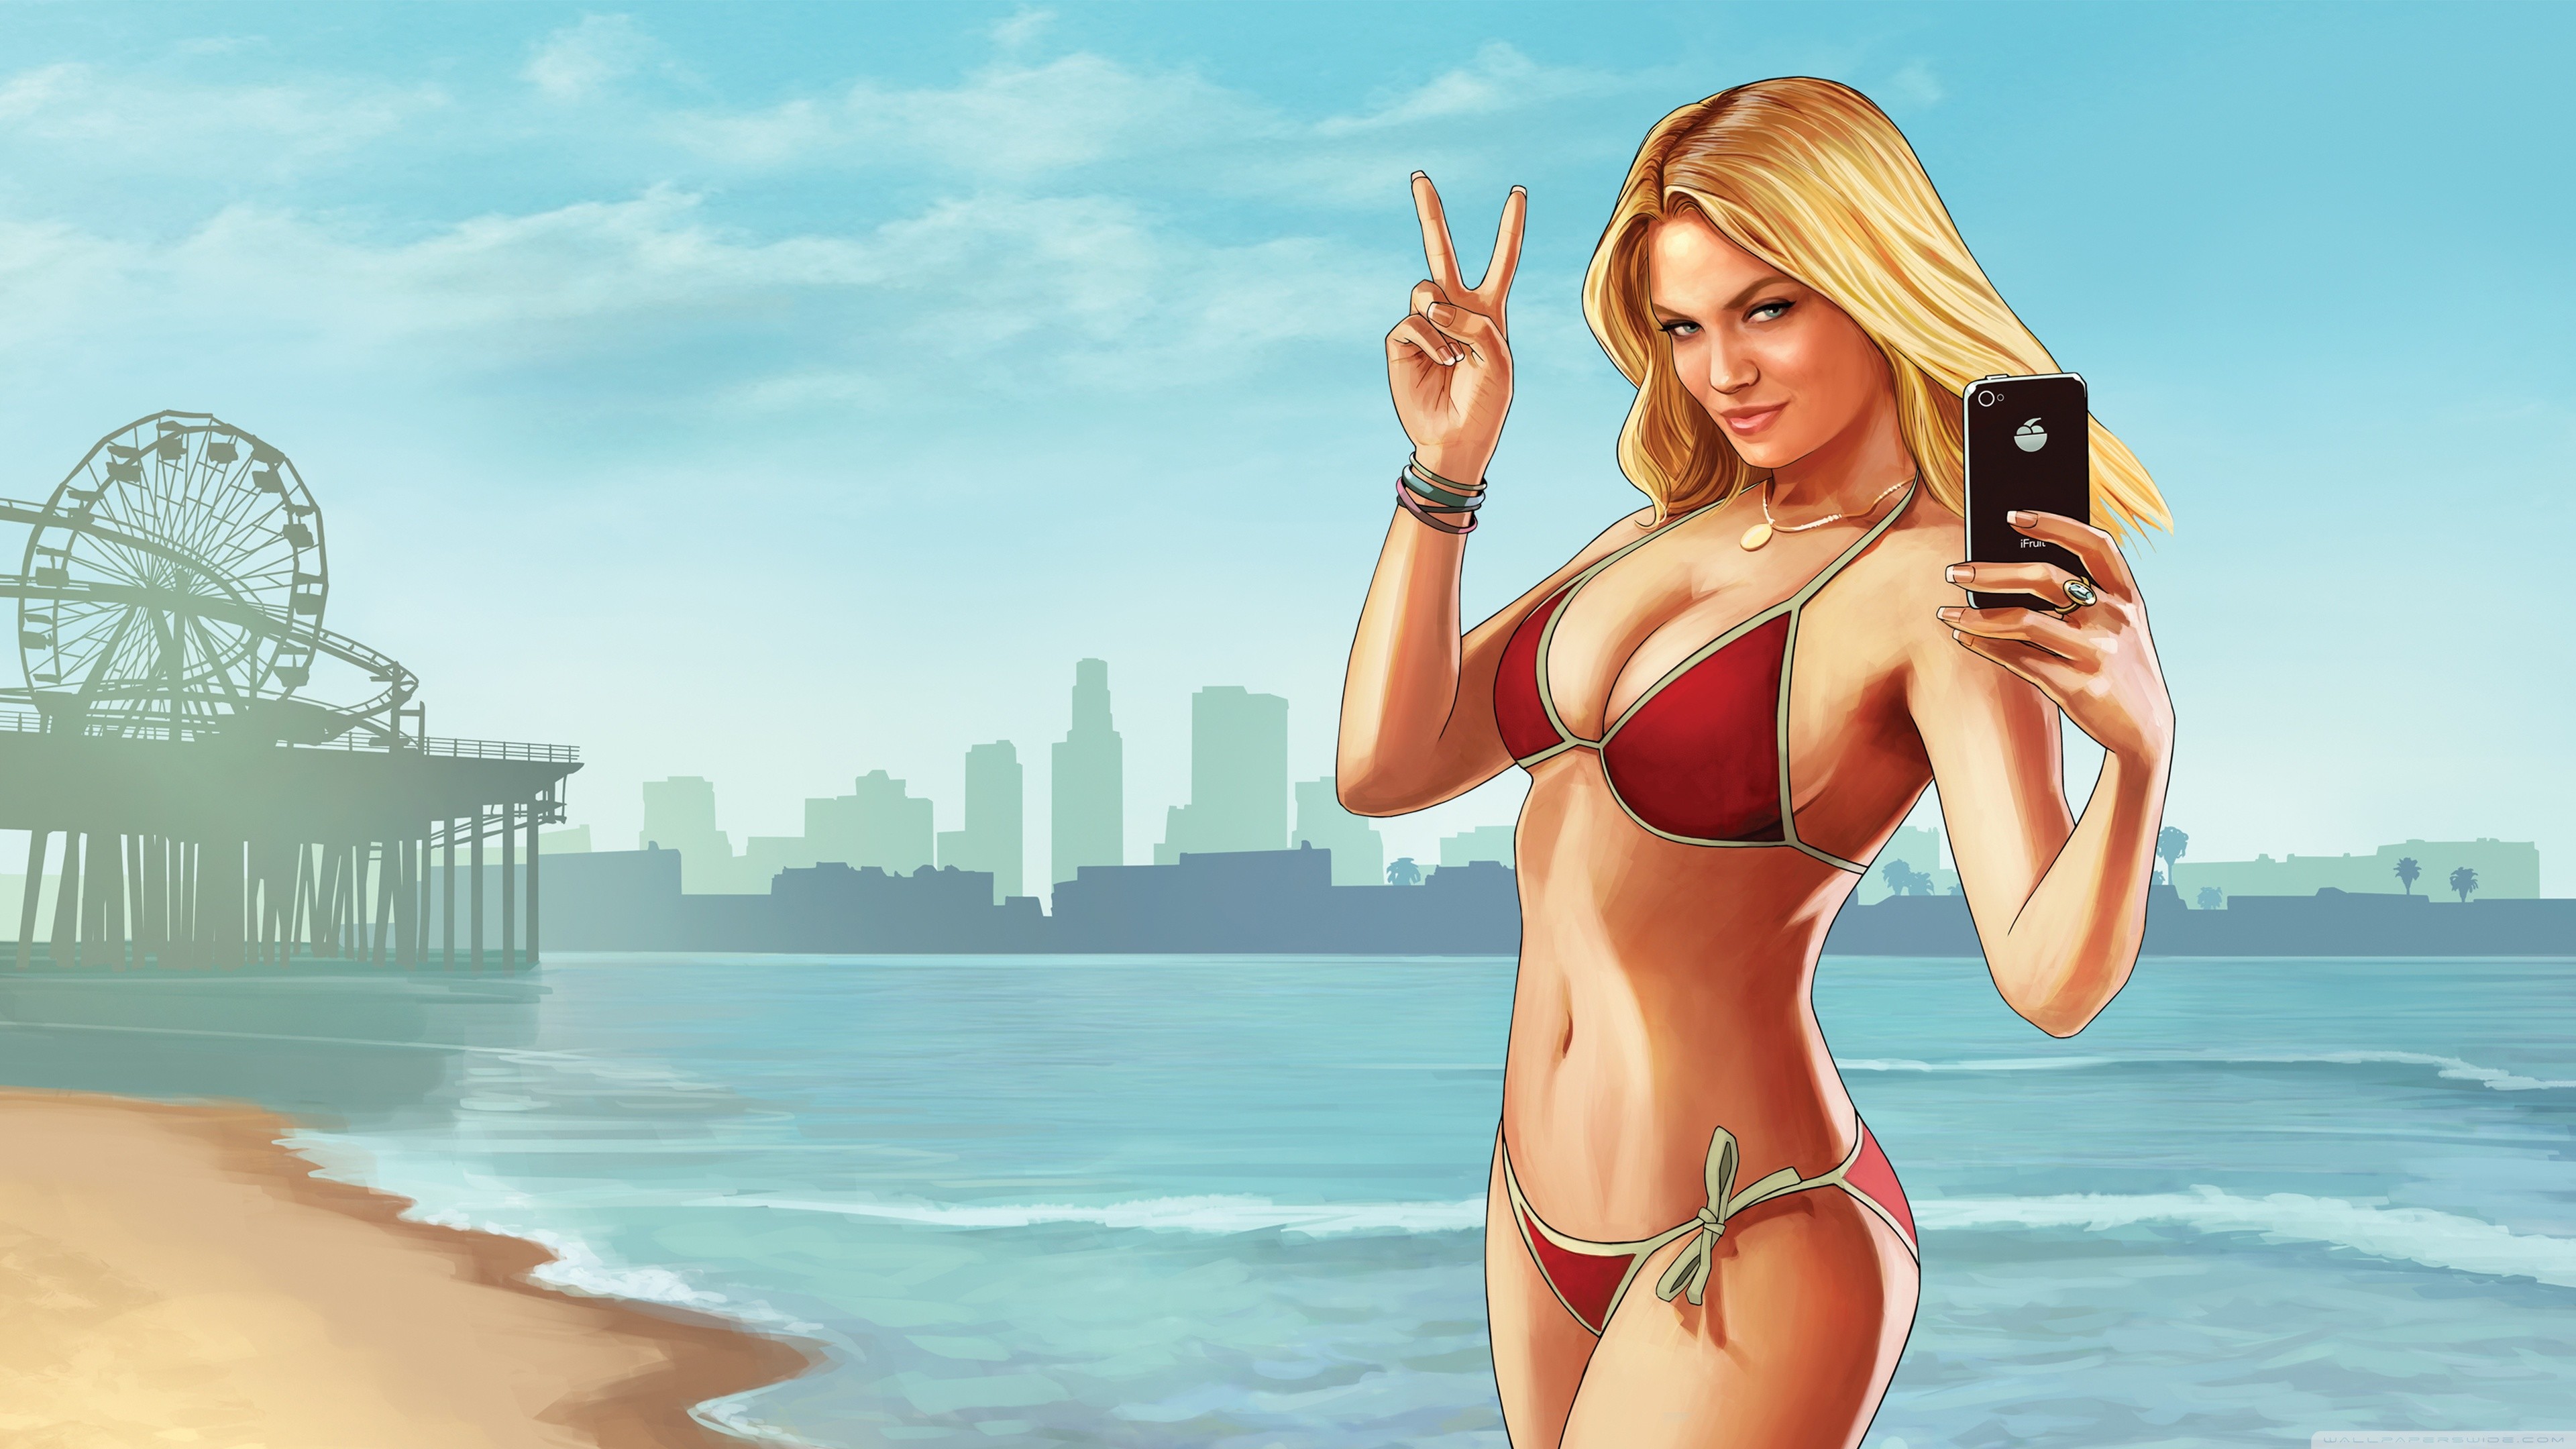 3840x2160 Grand Theft Auto V Beach Weather HD Wide Wallpaper for Widescreen